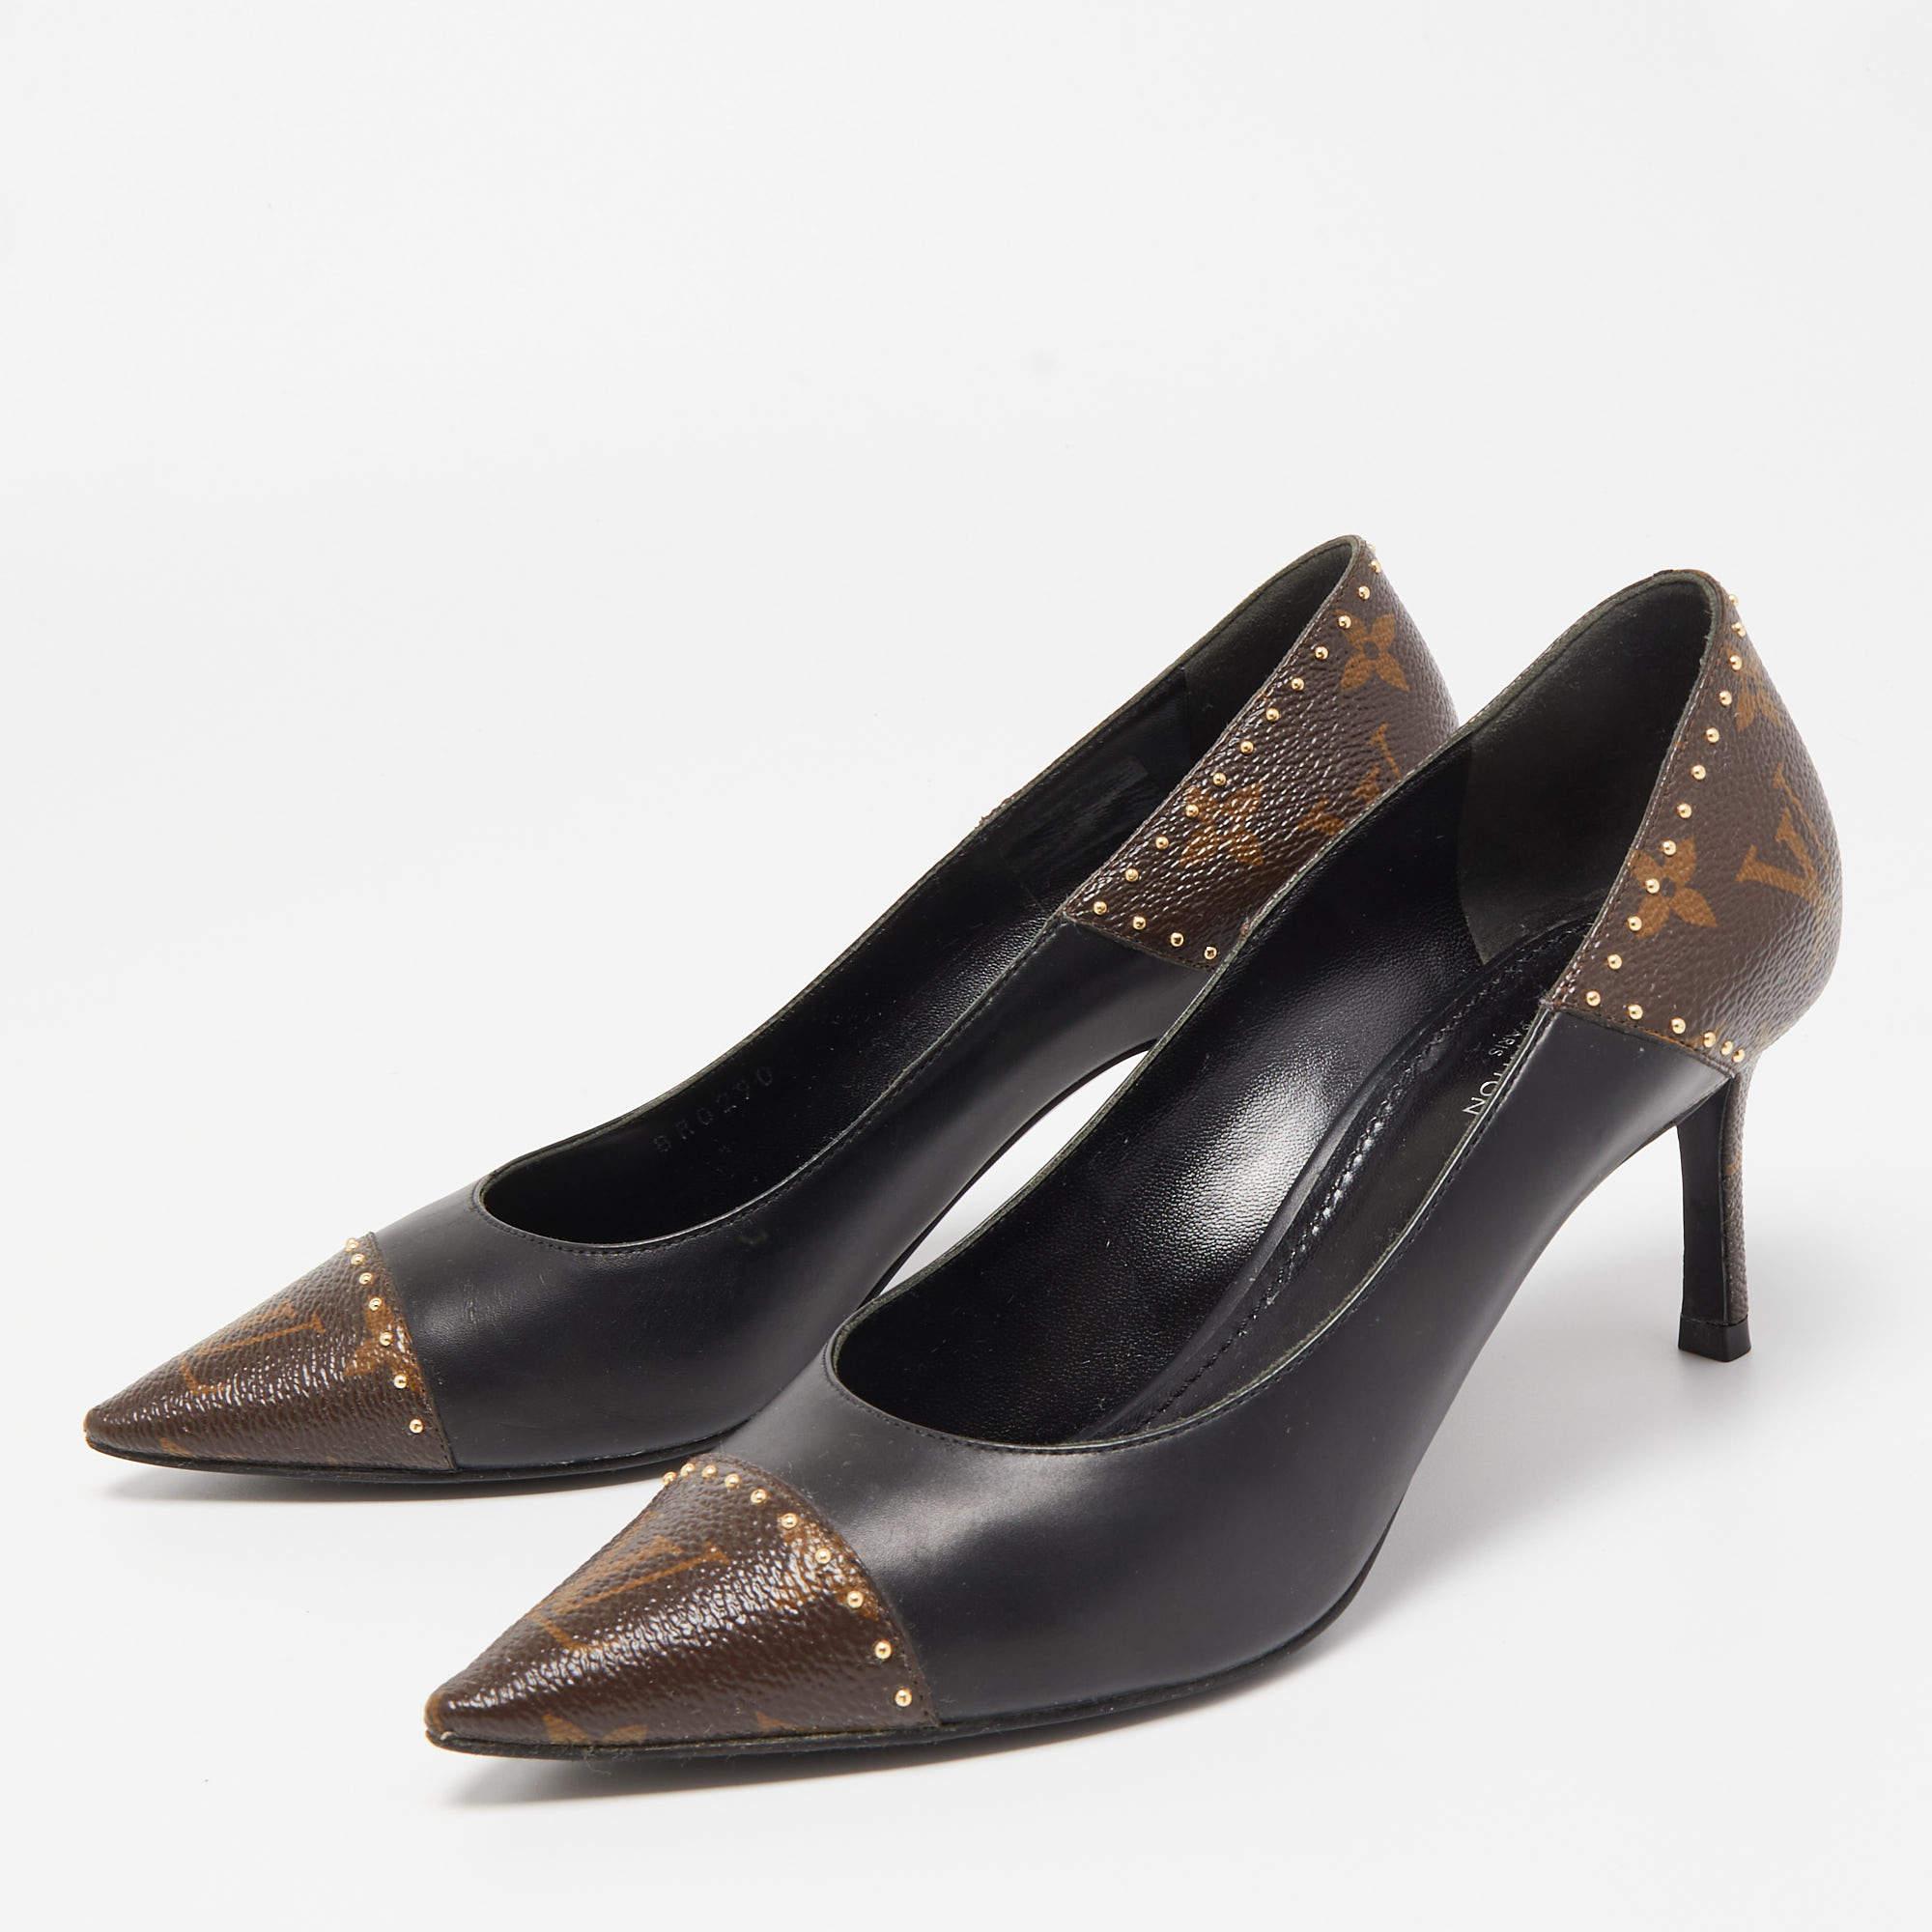 Discover the epitome of elegance with these LV women's pumps. Meticulously designed, these heels seamlessly marry fashion and comfort, ensuring you shine in every setting.

